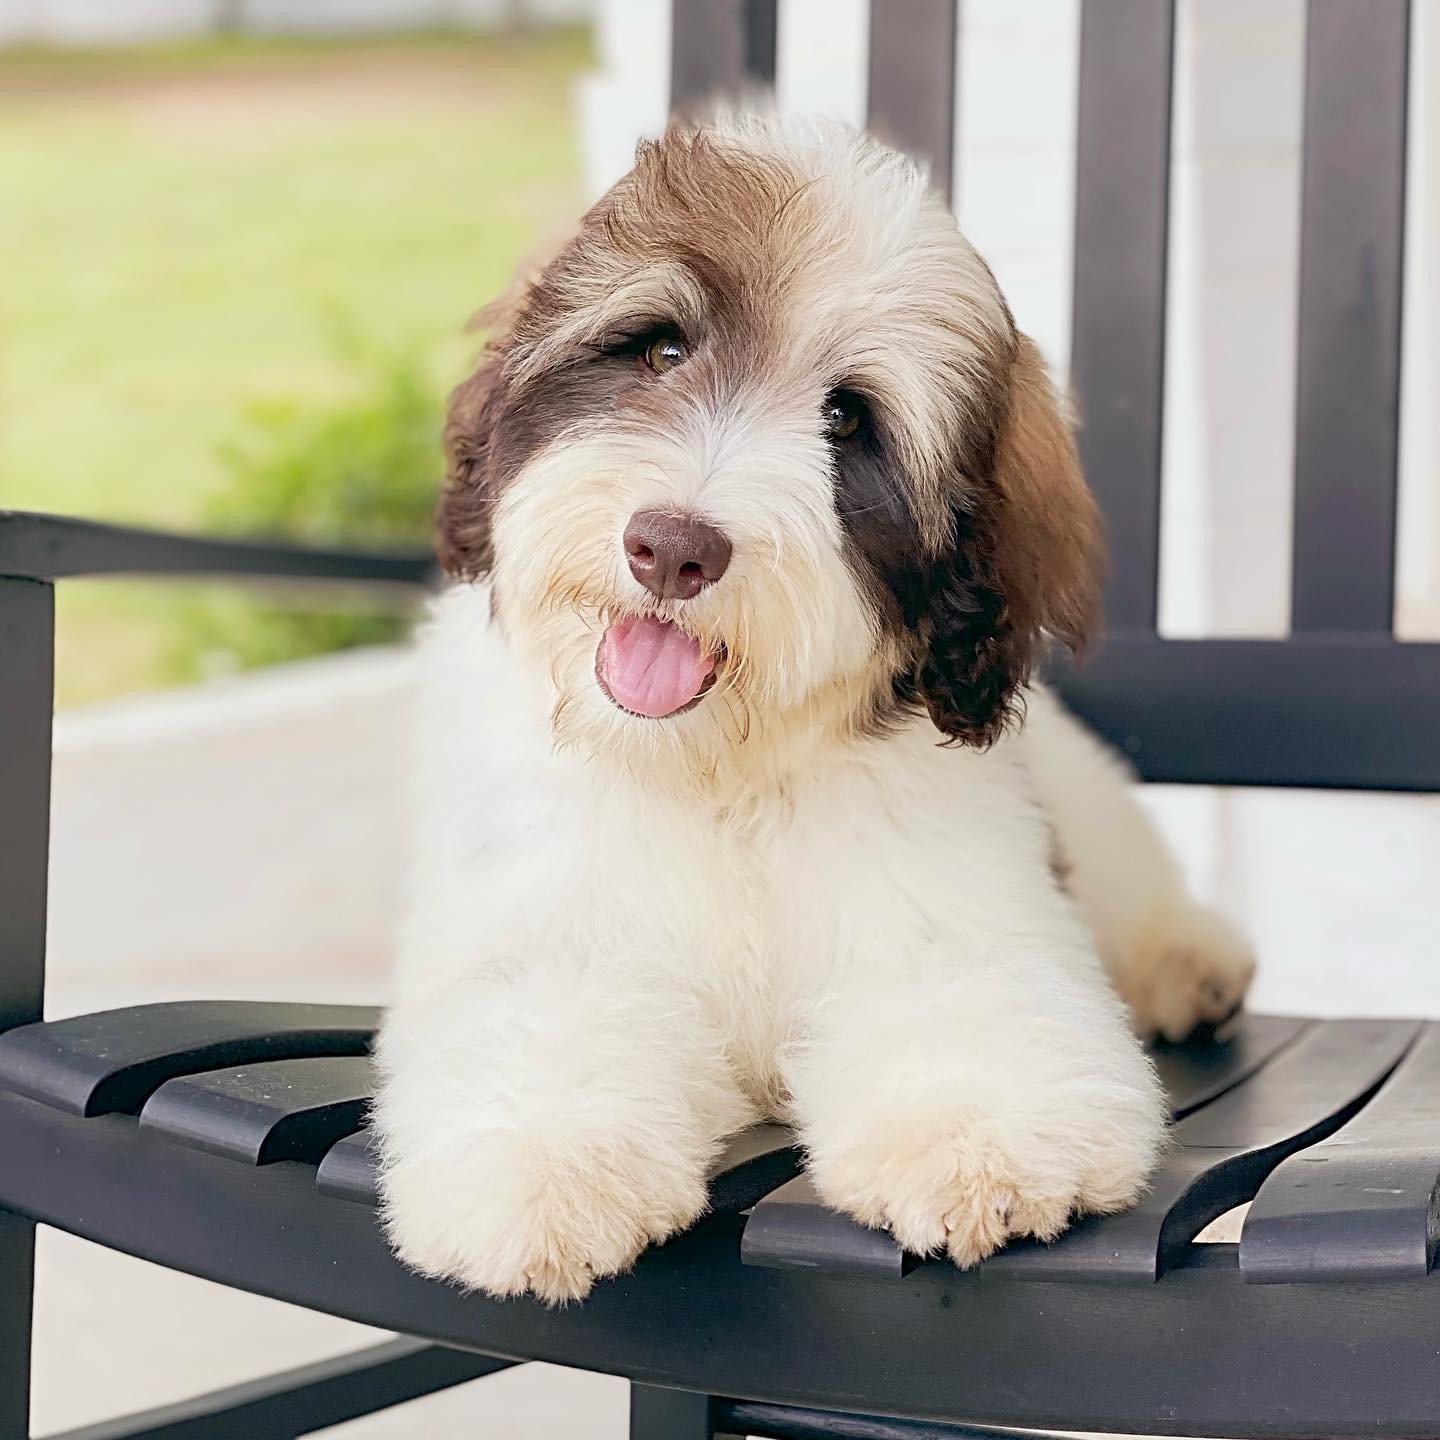 The wookie parti golden doodle is sitting in a chair and looks very comfortable. His soft fur is a beautiful white and brown pattern, and his big brown eyes seem to be looking right at you. He's clearly enjoying his relaxing moment!